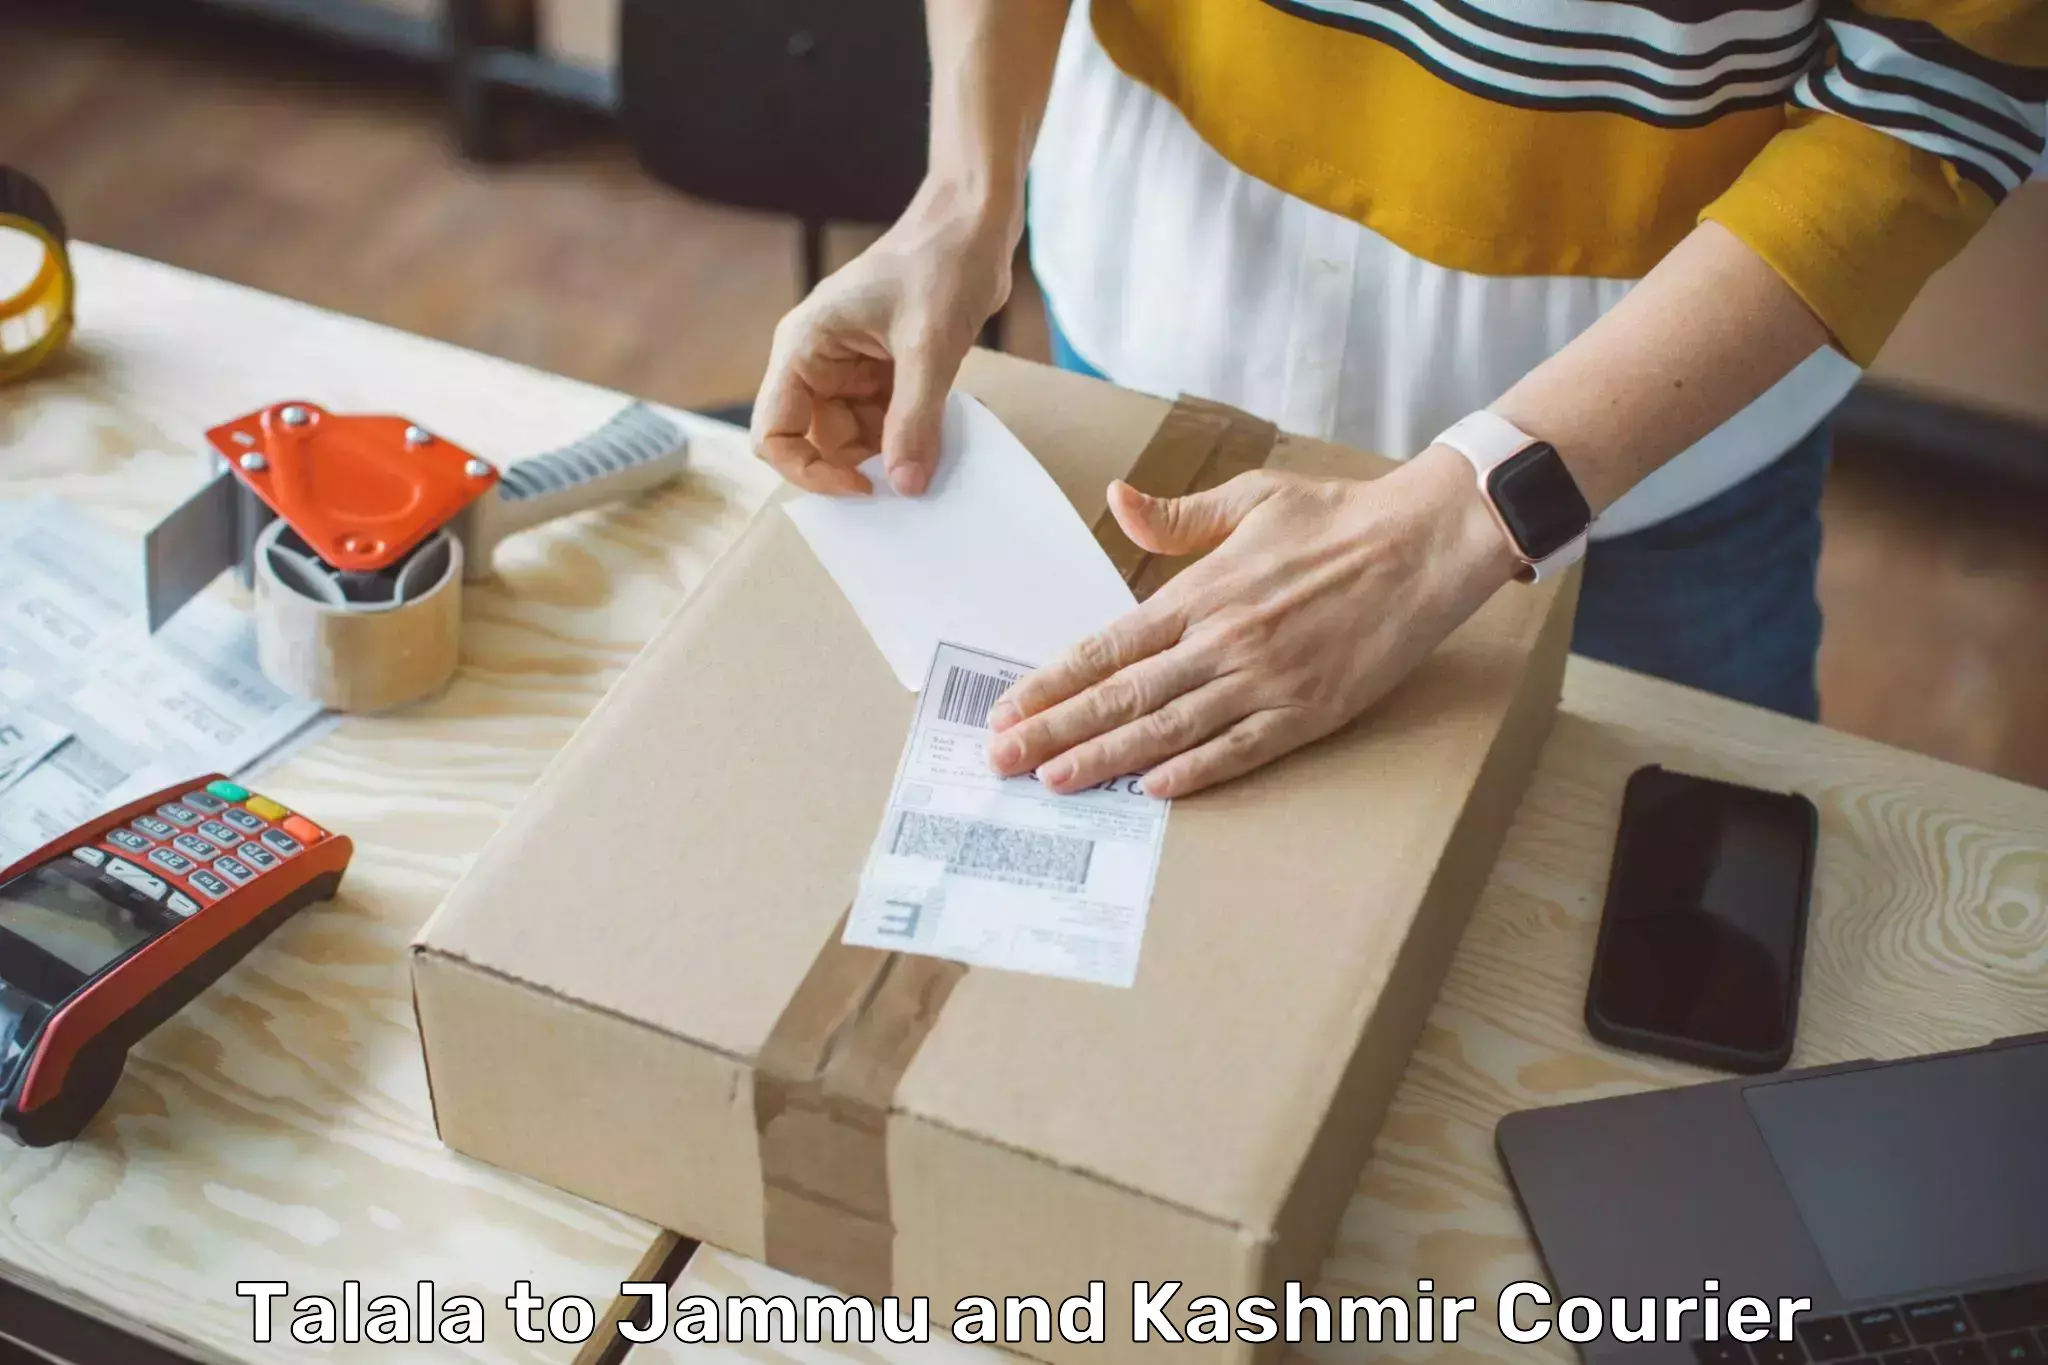 Courier service booking Talala to Jammu